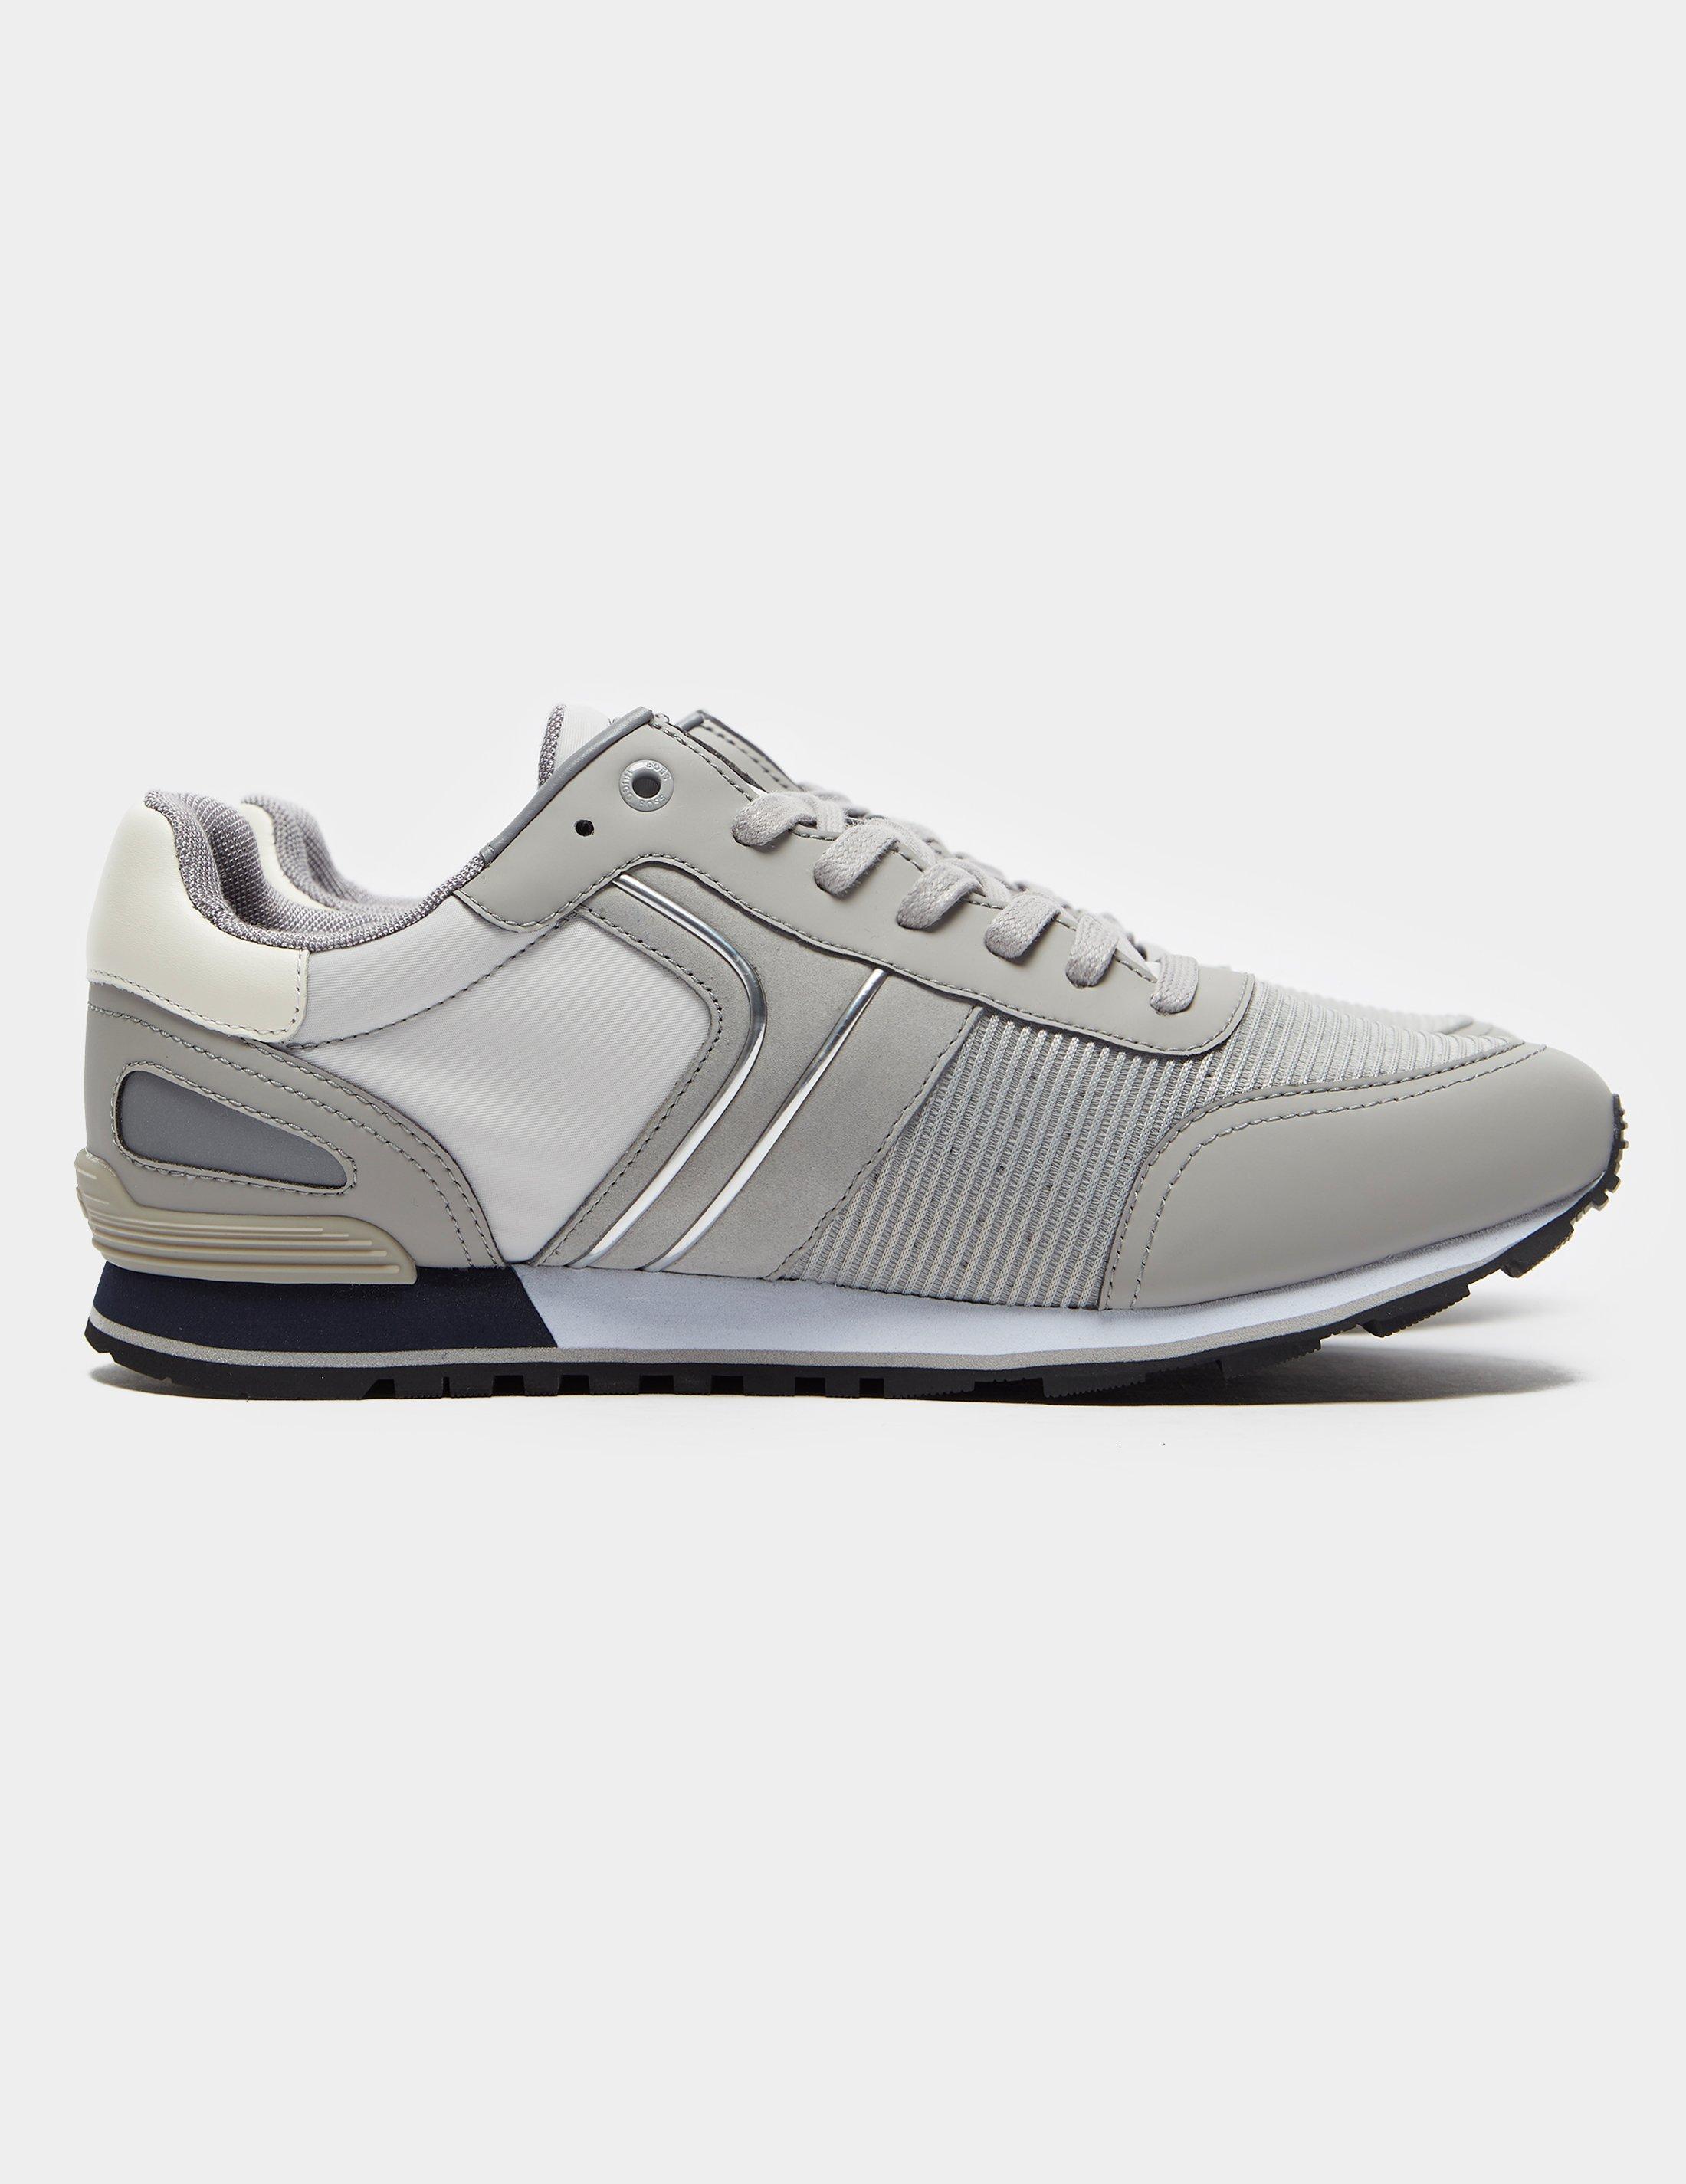 BOSS by HUGO BOSS Synthetic Parkour Run Grey in Grey for Men - Lyst